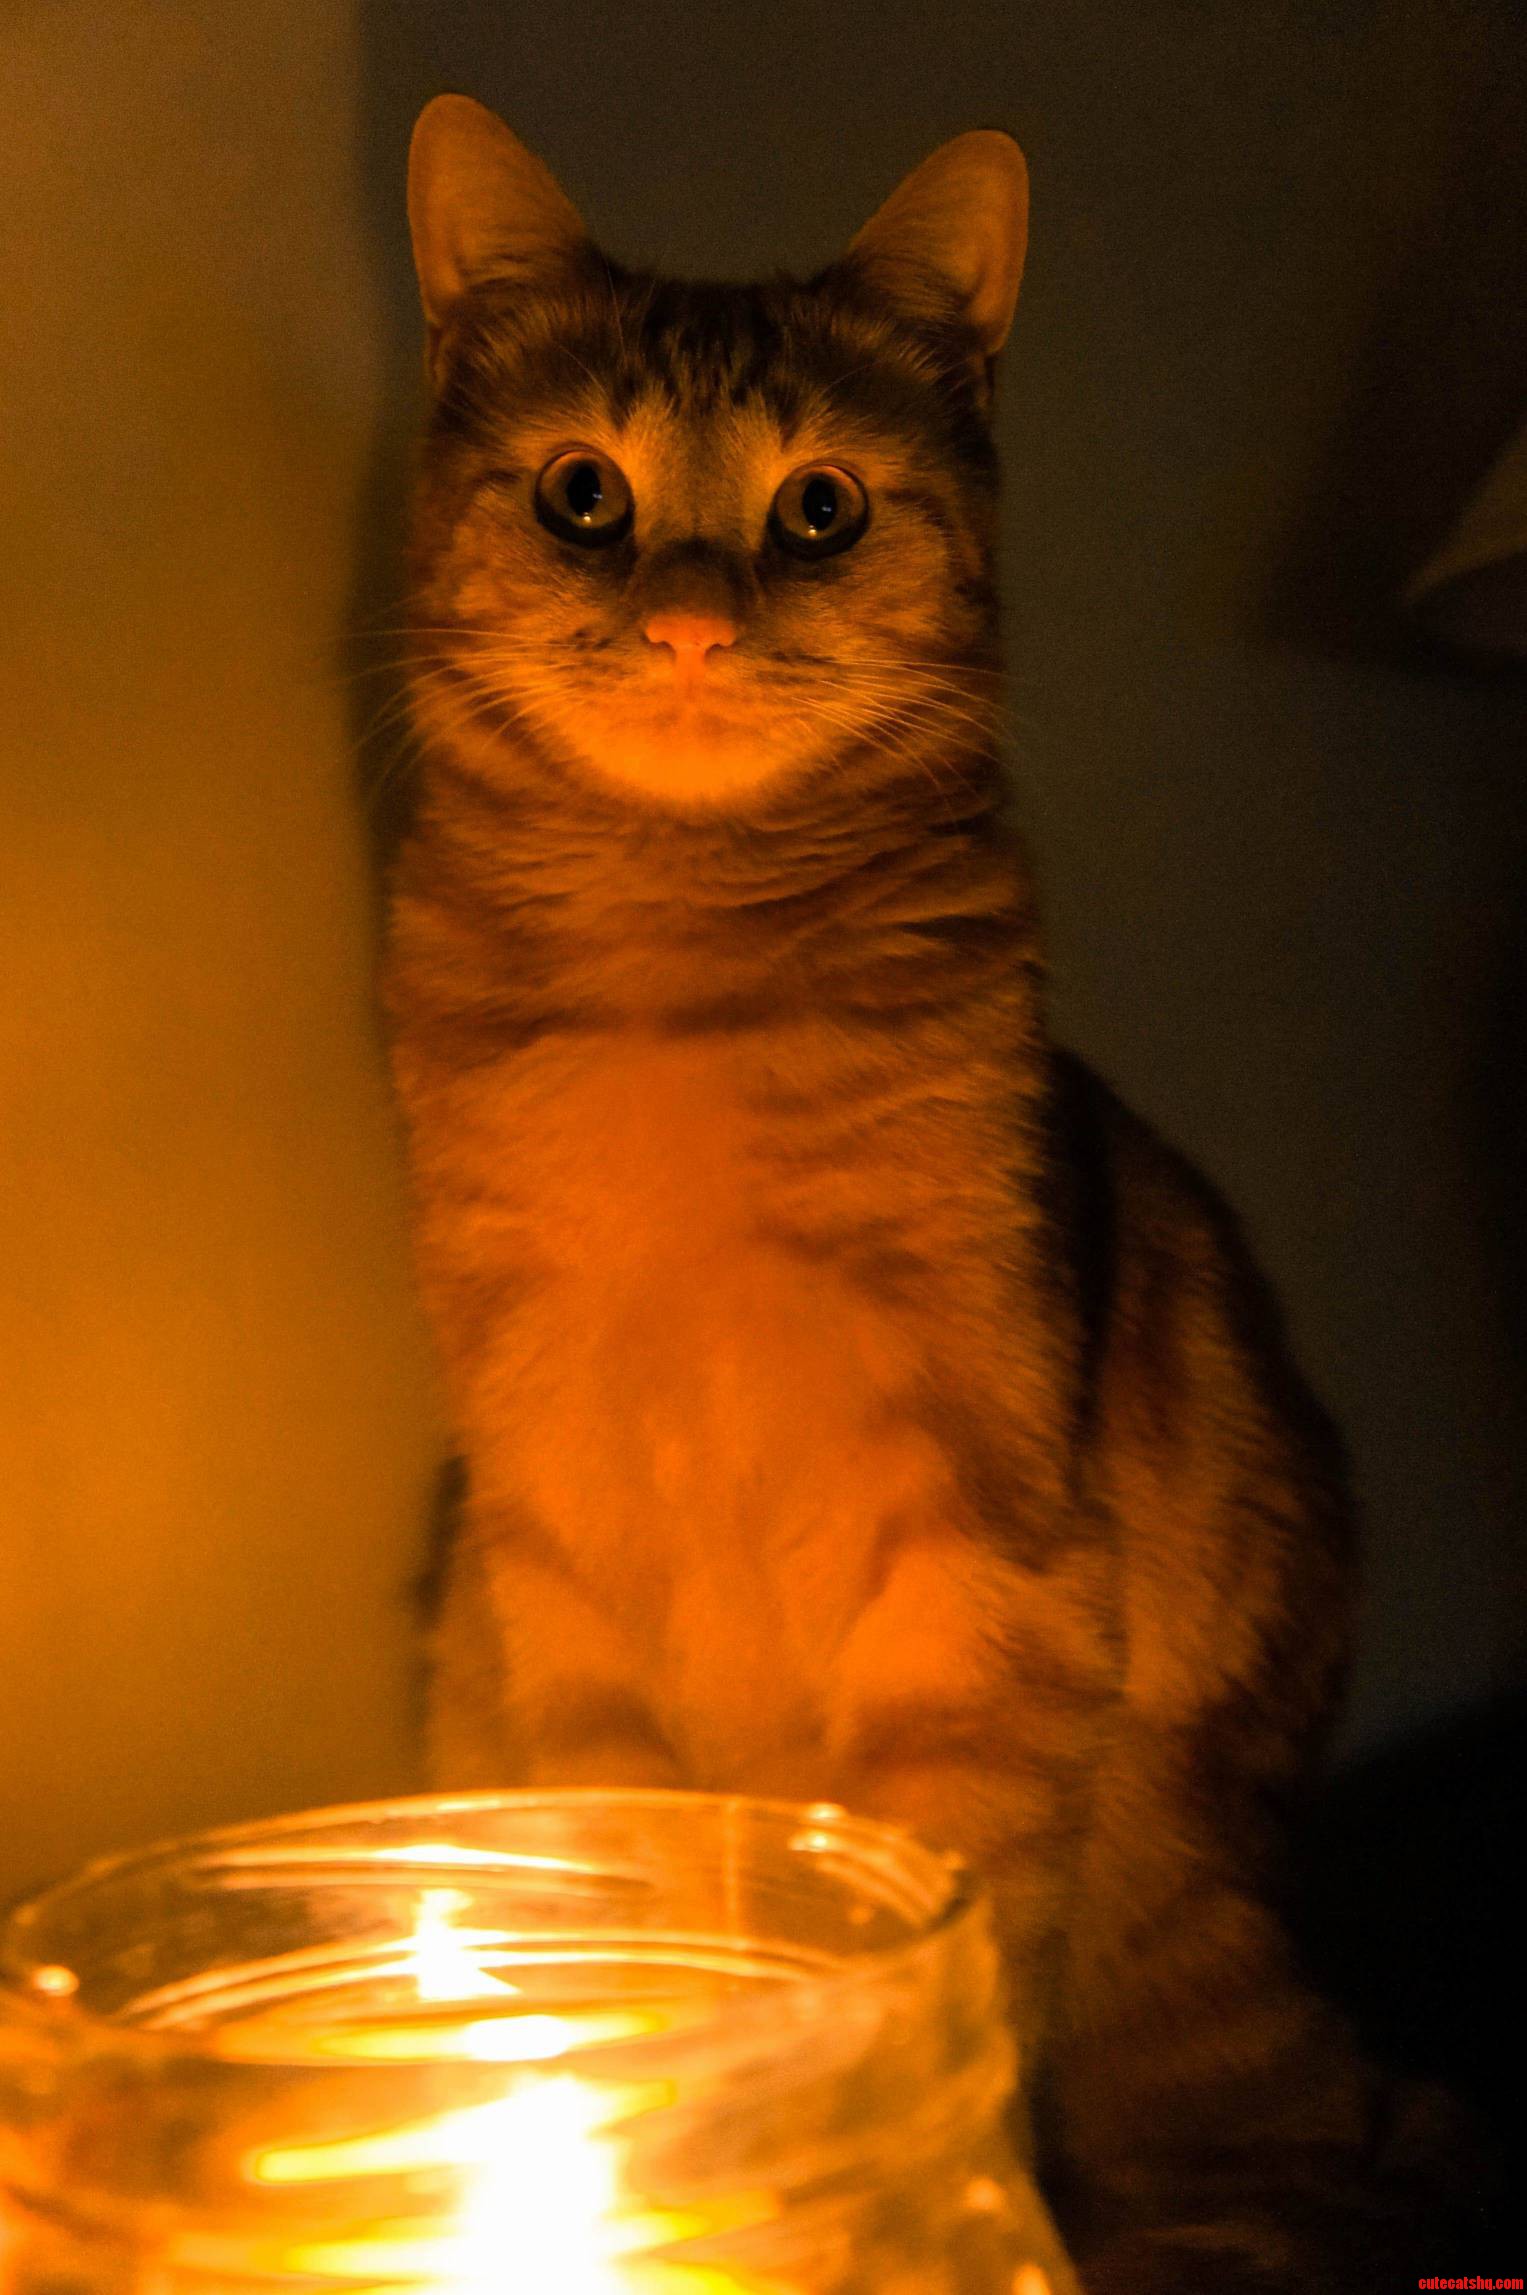 He loves candles even though he has burned his paw and whiskers on one.